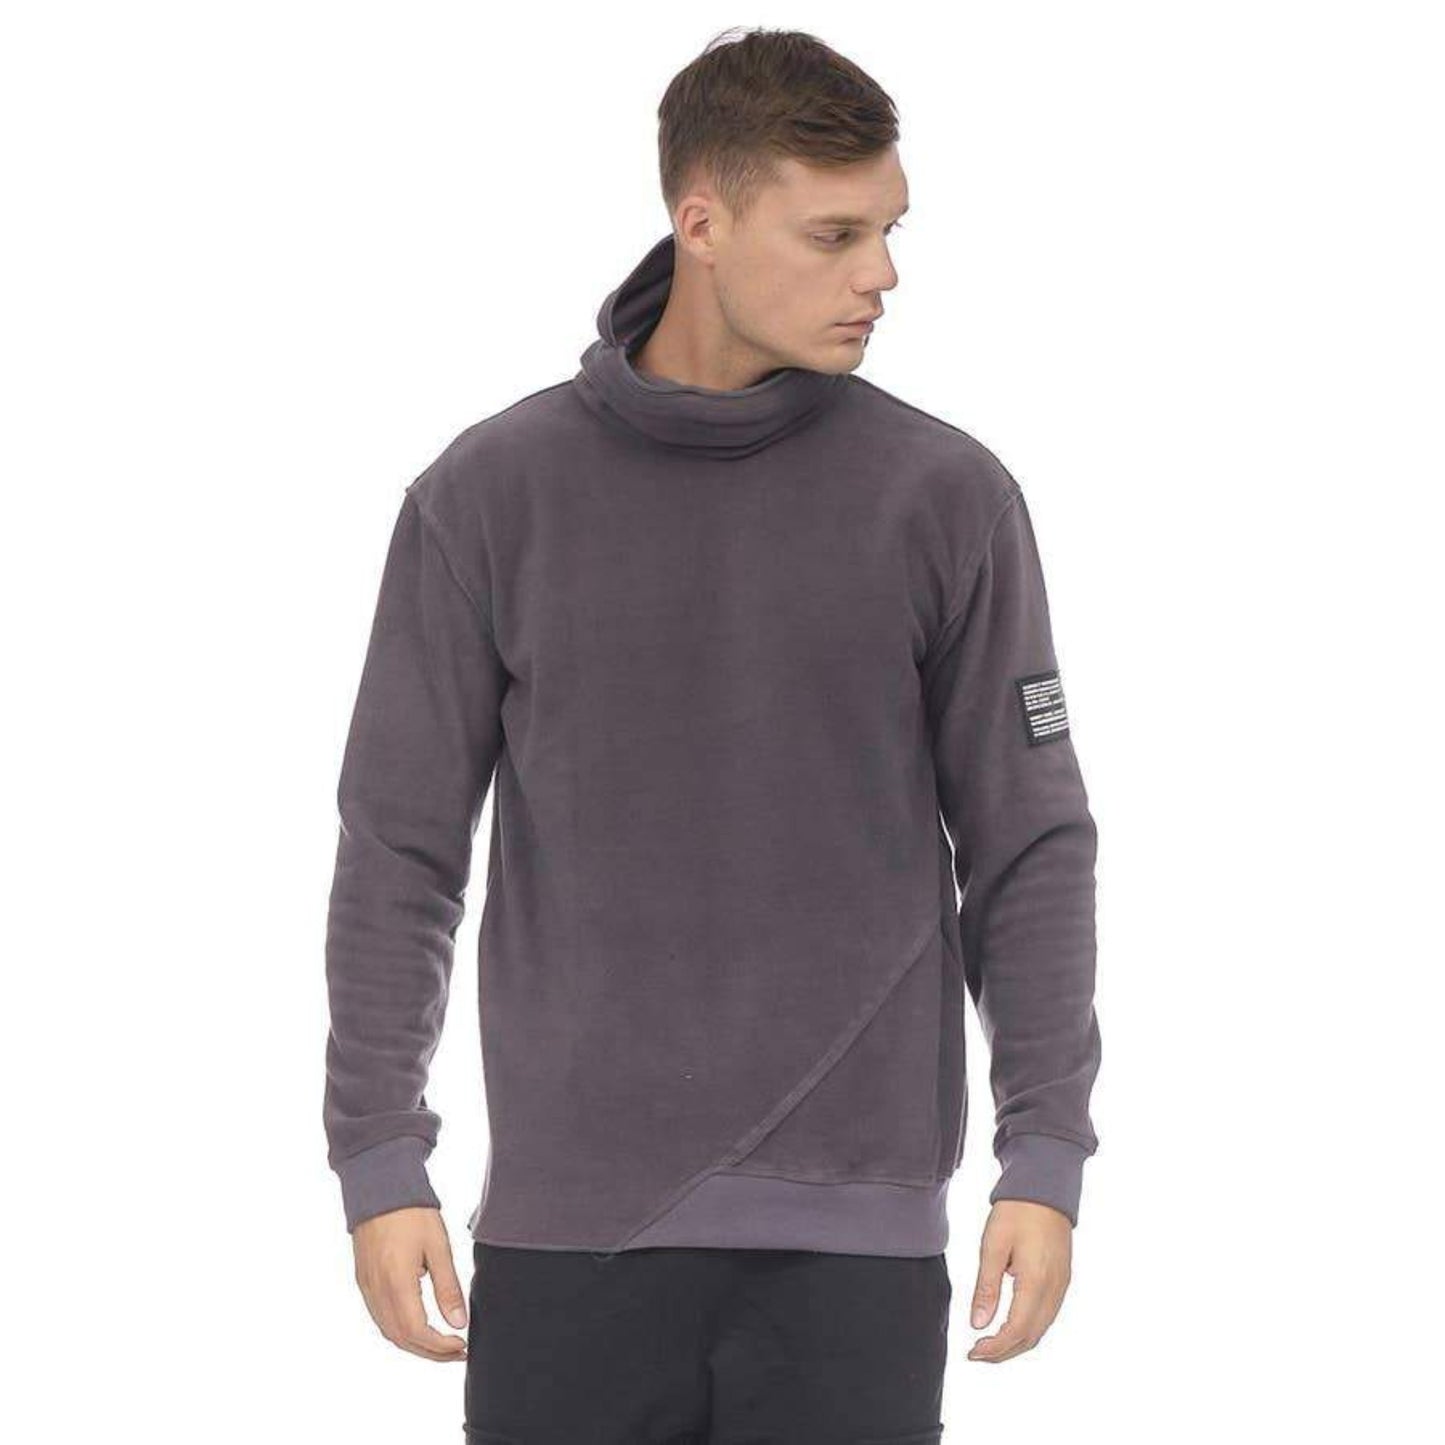 RON TOMSON Face Covering Polar Hoodie - Anthracite